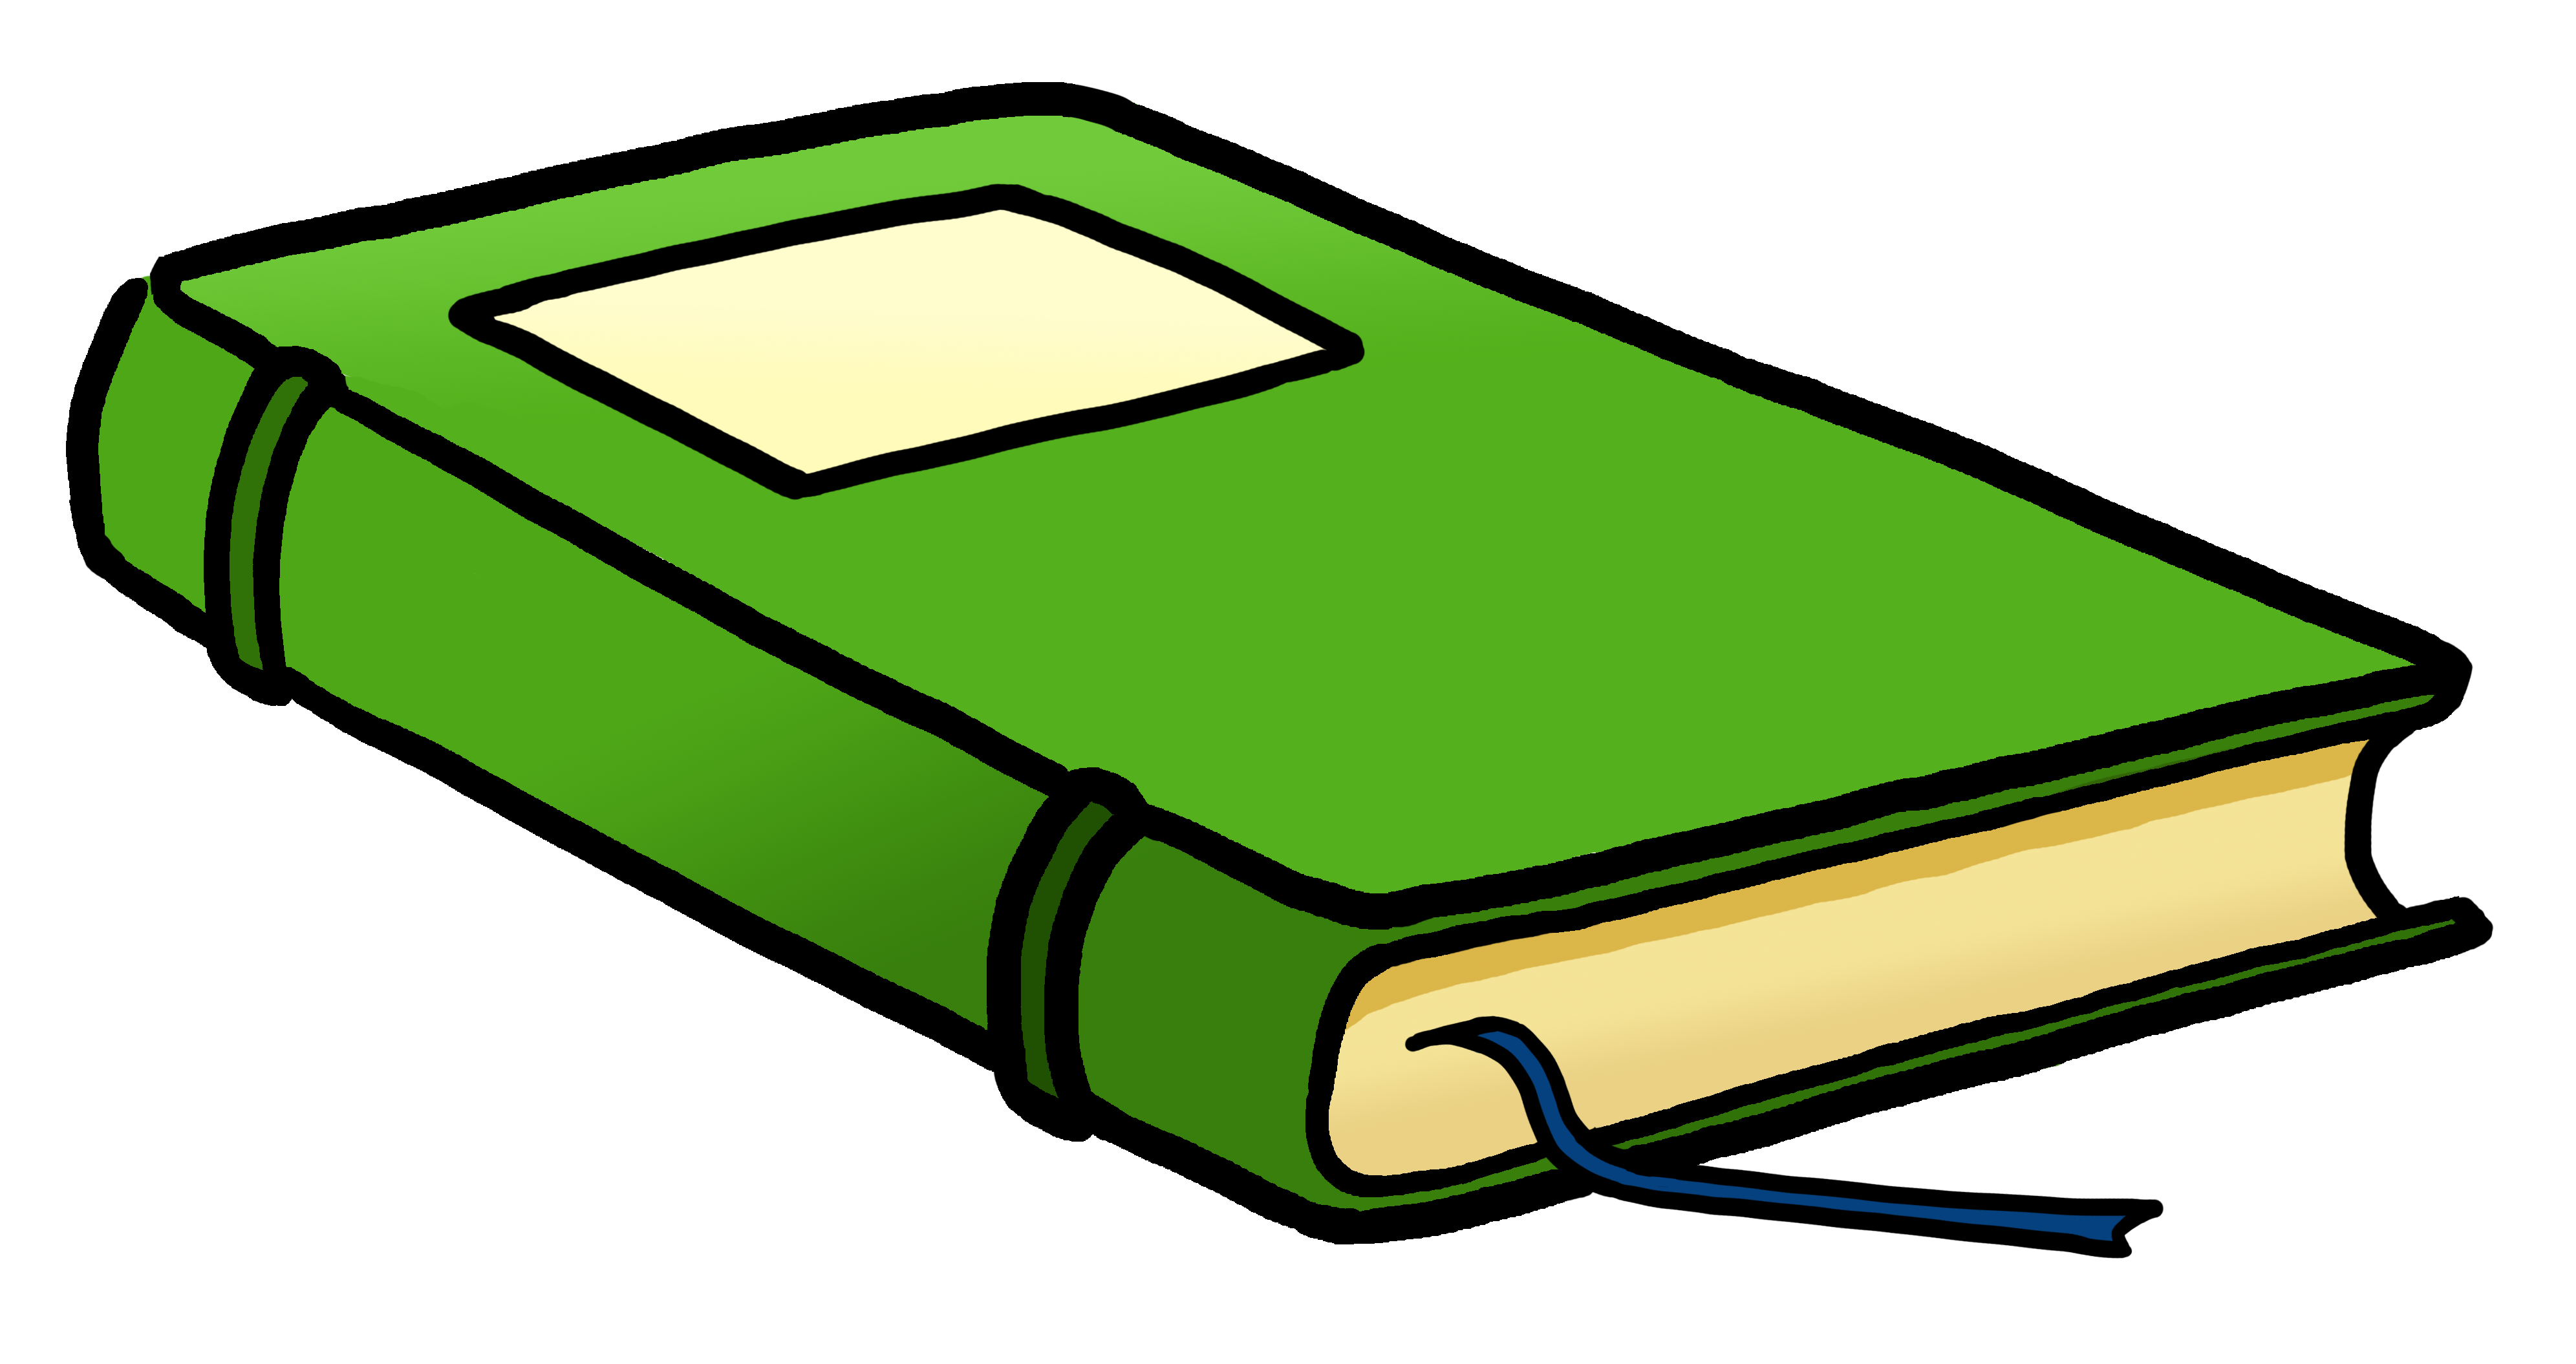 Closed book clip art free clipart images